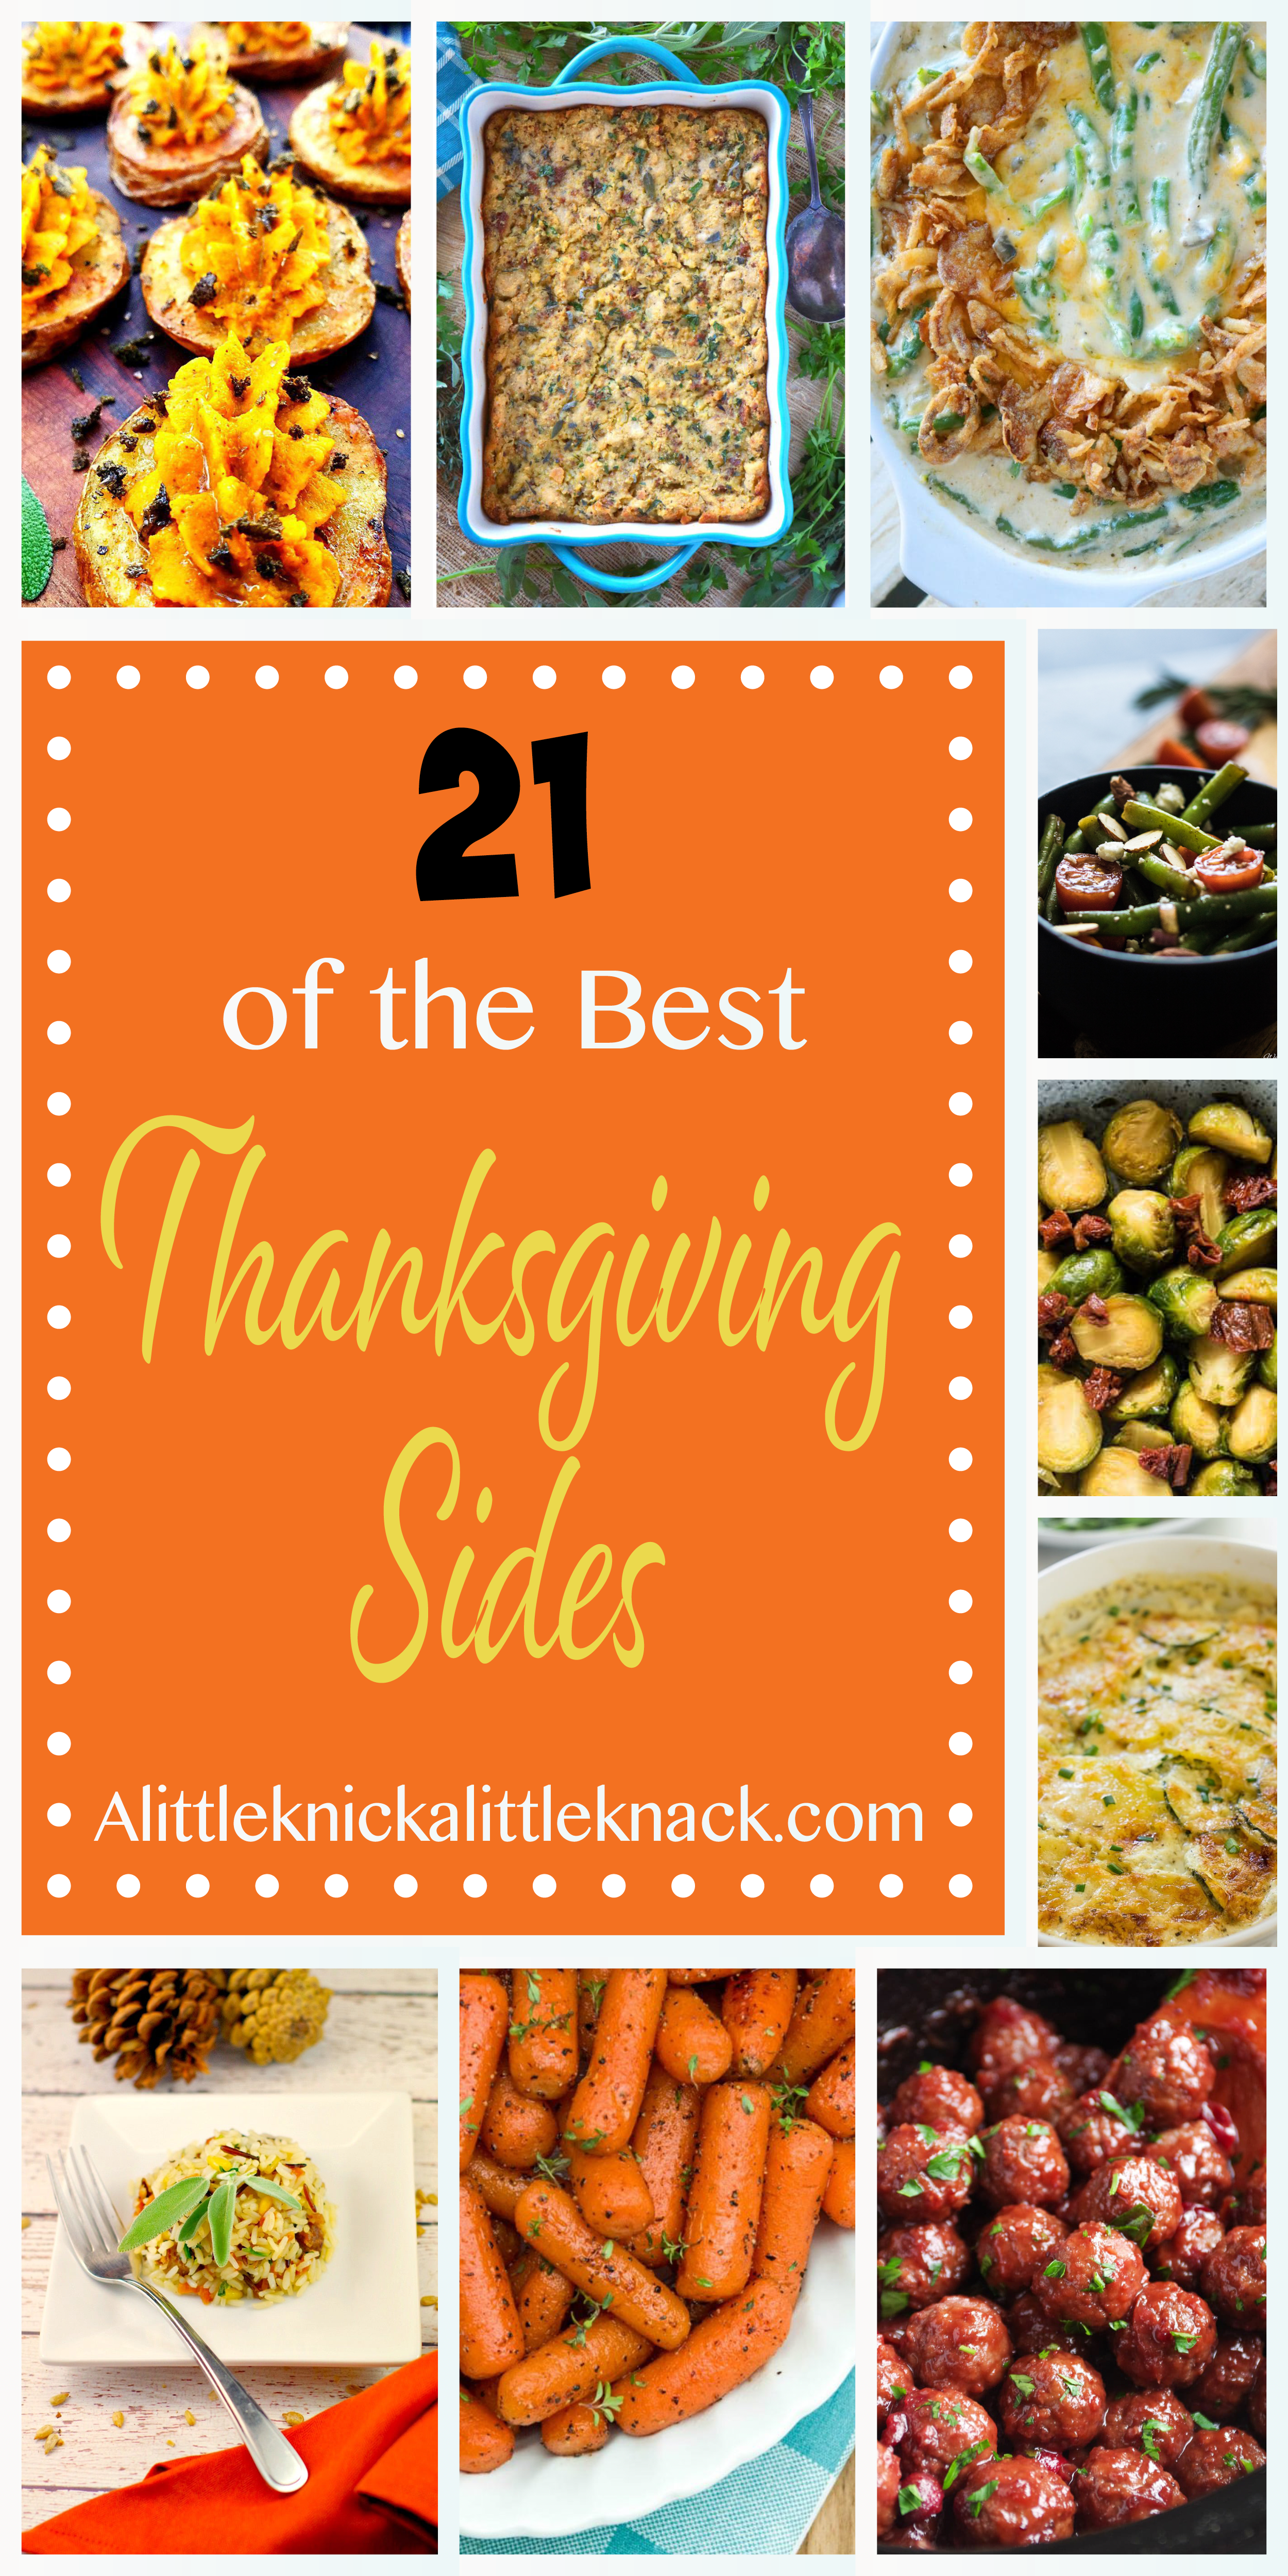 From sweet potatoes to green beans these are 21 of the most delicious Thanksgiving side dish recipes. #thanksgivingrecipe